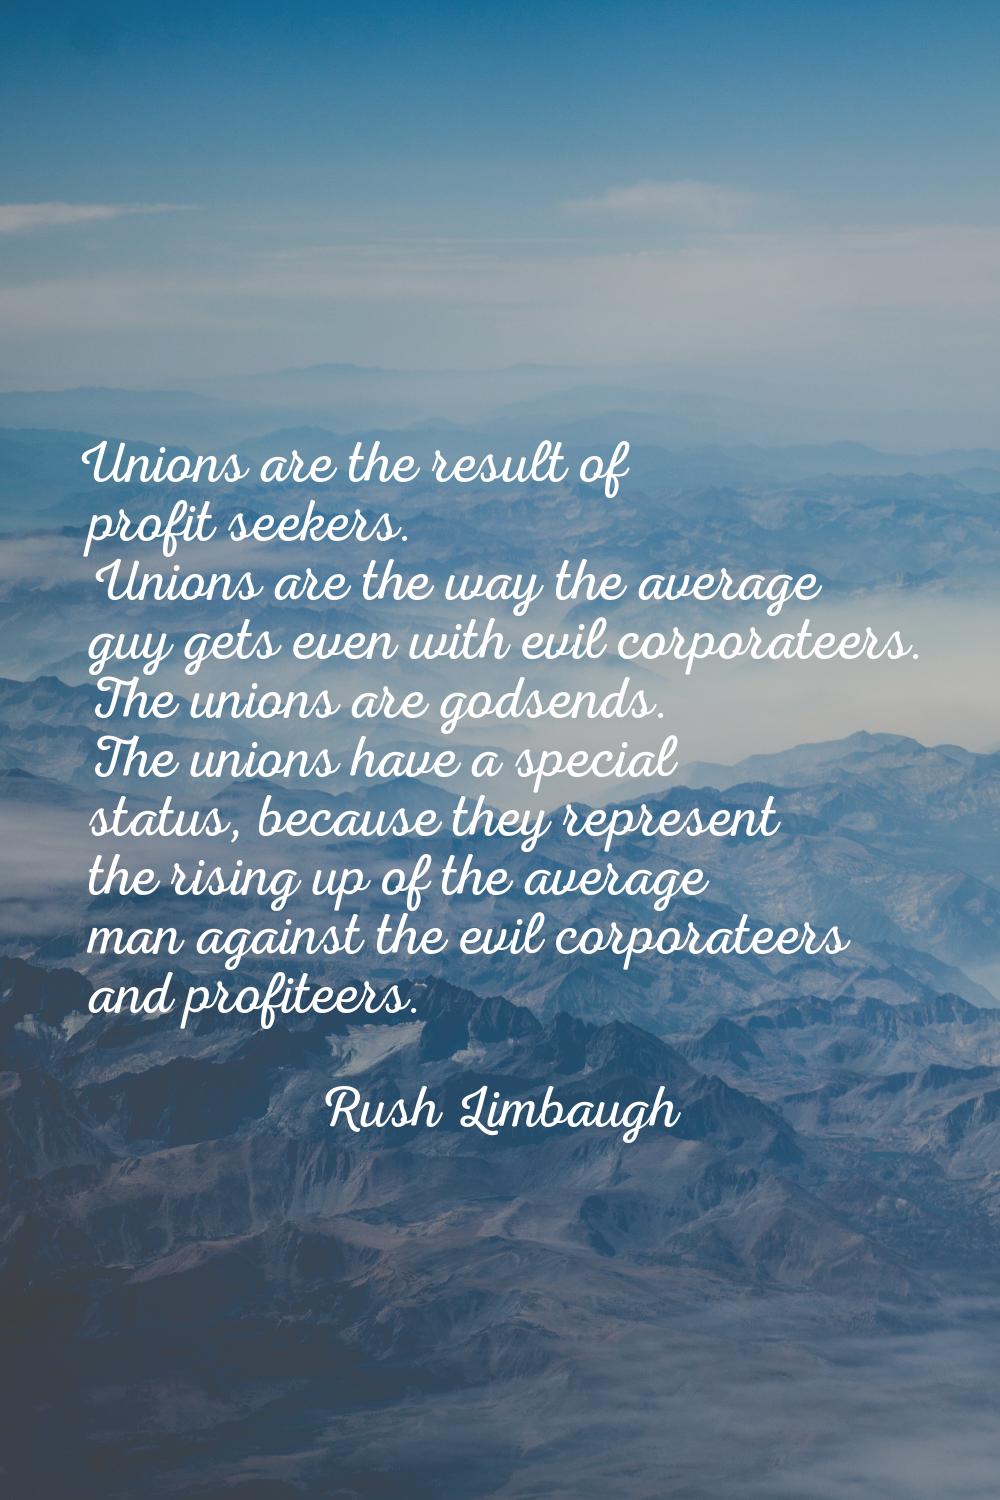 Unions are the result of profit seekers. Unions are the way the average guy gets even with evil cor